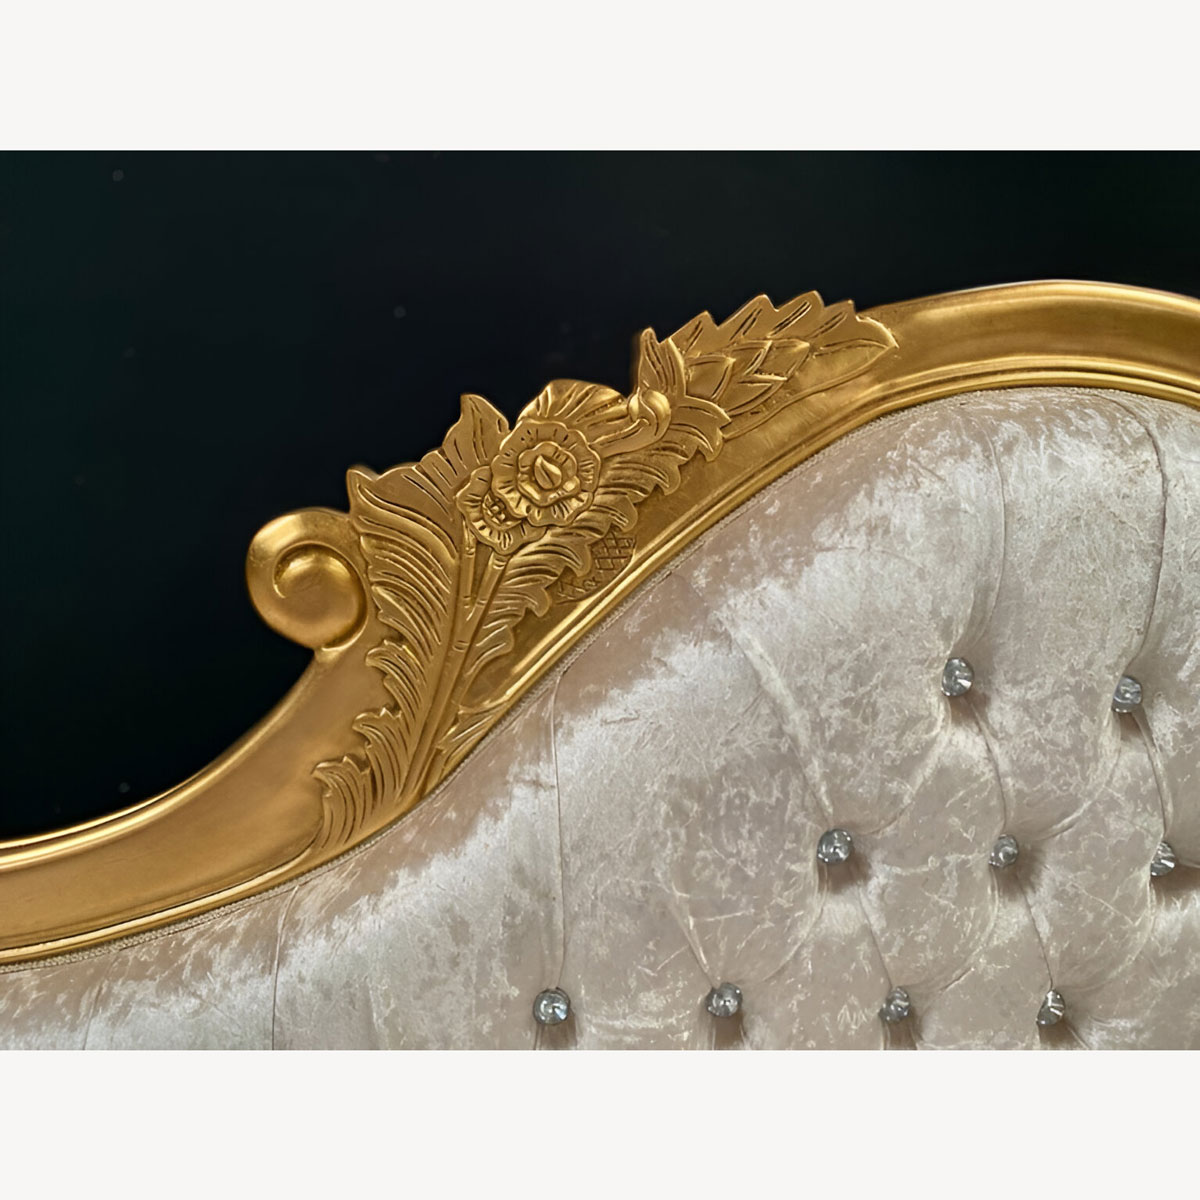 Chaise Hampshire Sofa In Gold Leaf Frame Upholstered In Ivory Cream Crushed Velvet With Crystal Buttoning 2 - Hampshire Barn Interiors - Chaise Hampshire Sofa In Gold Leaf Frame Upholstered In Ivory Cream Crushed Velvet With Crystal Buttoning -